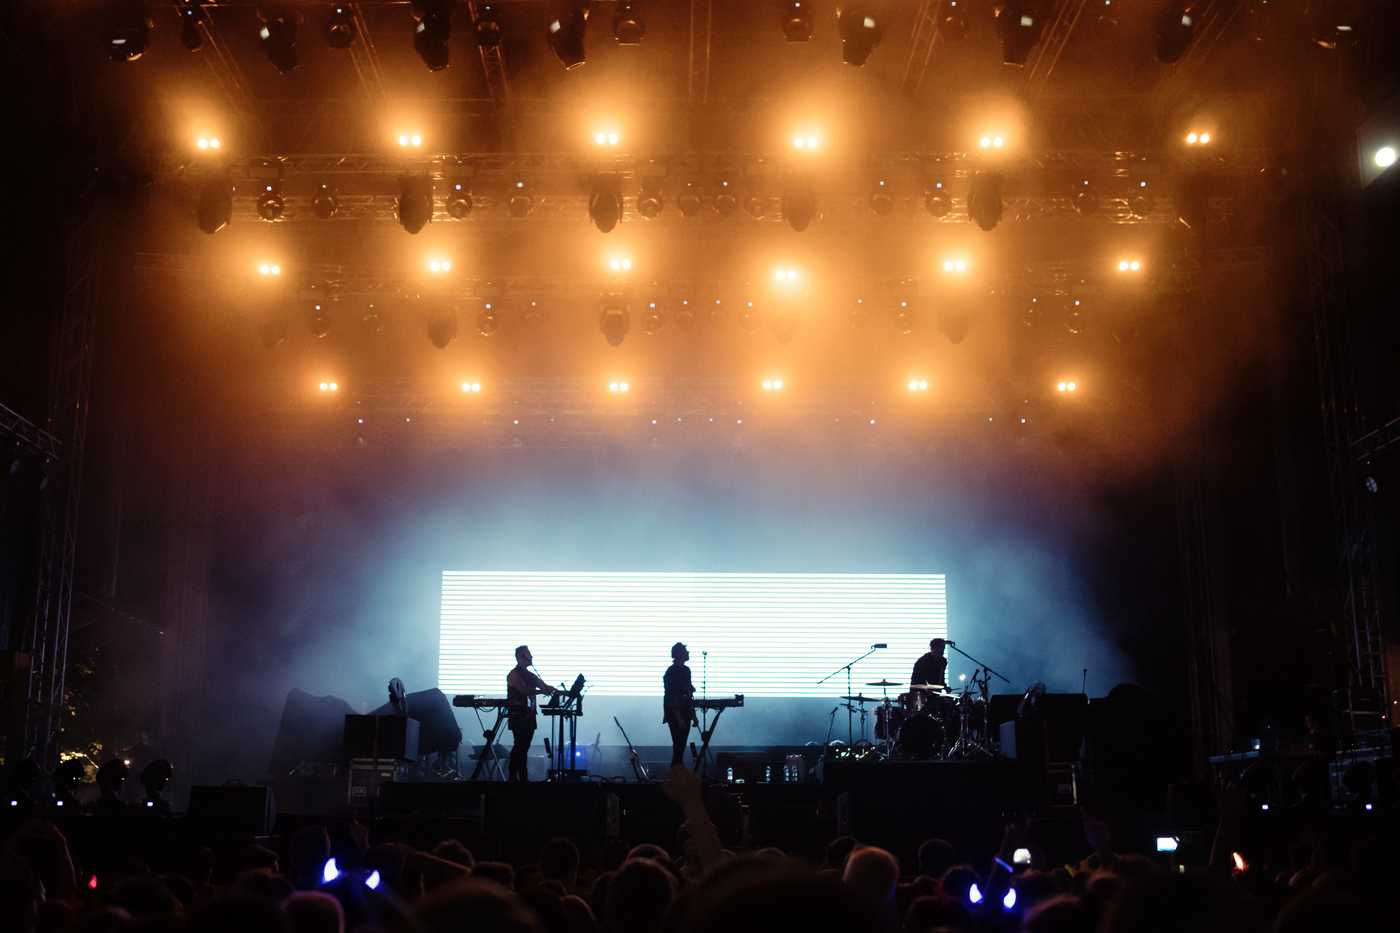 Image of a concert hall with big bright orange lights on the ceiling and on stage playing a three man band.